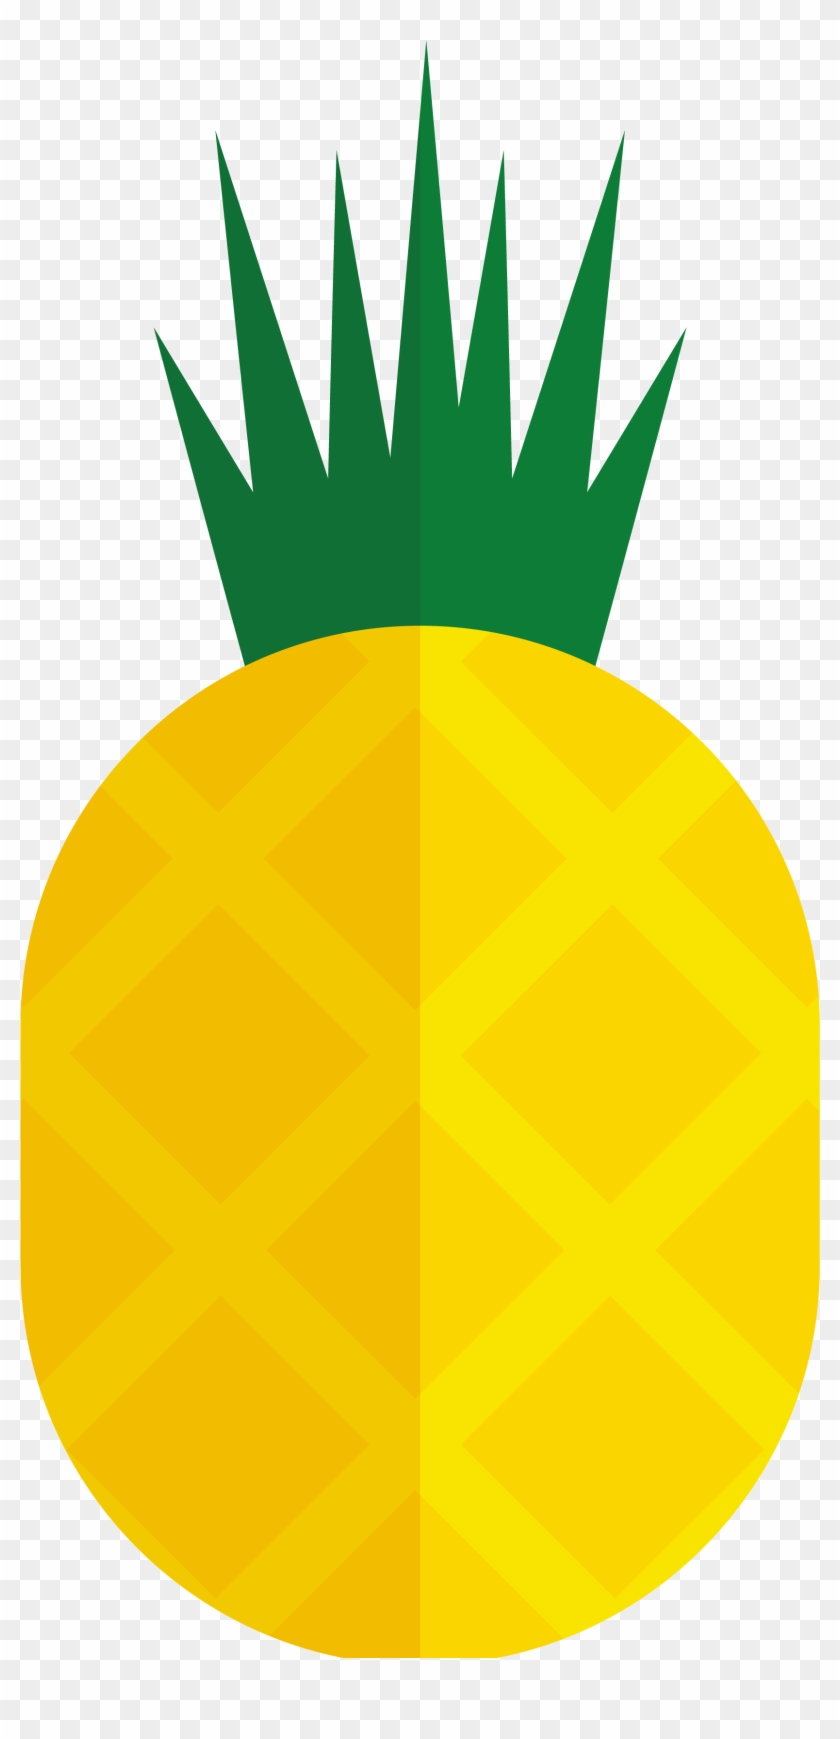 Collection Of Free Pineapple Vector Leaf - Pineapple Clipart #1653349